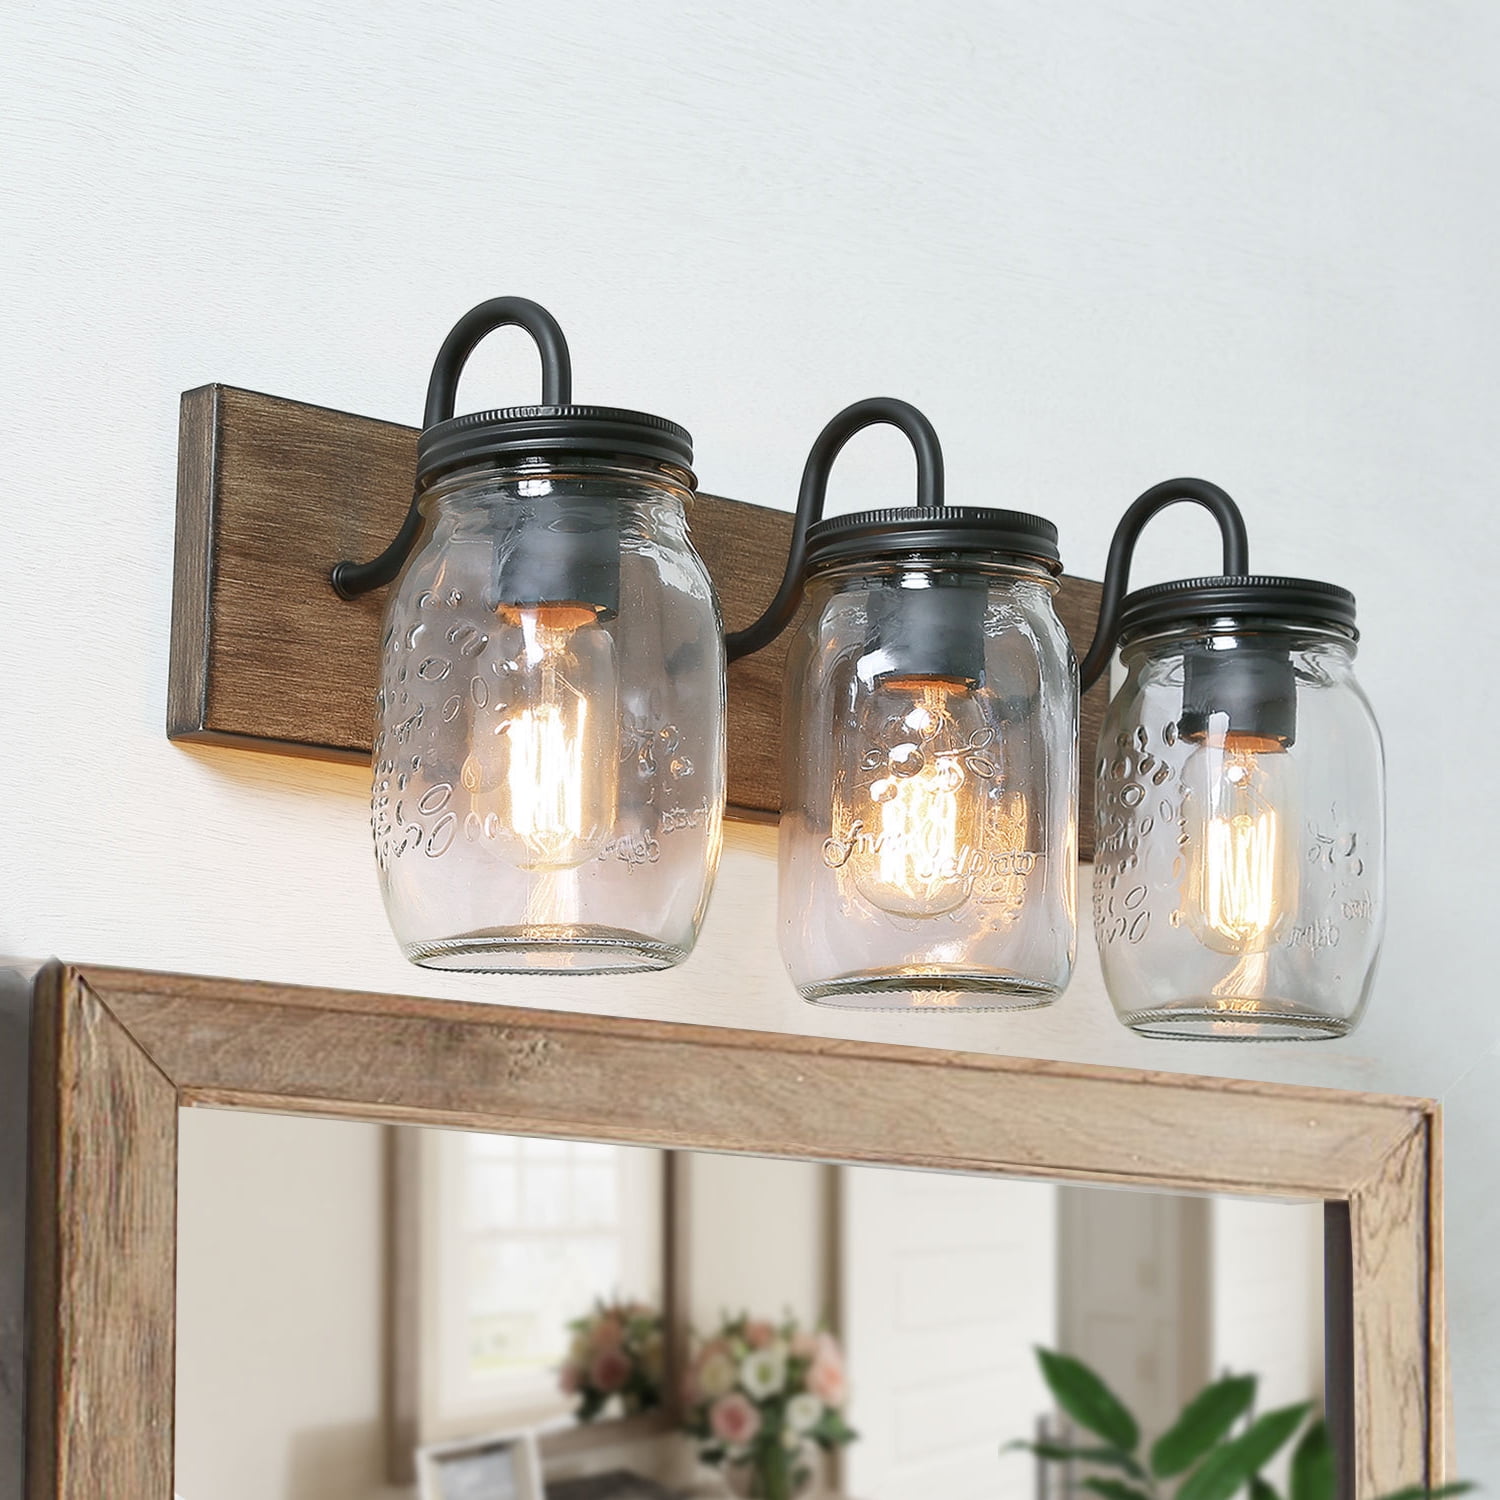 Details about   Country Wooden Base Wall Sconce Indoor Lantern 2 Lights Rustic Wall Light Cafe